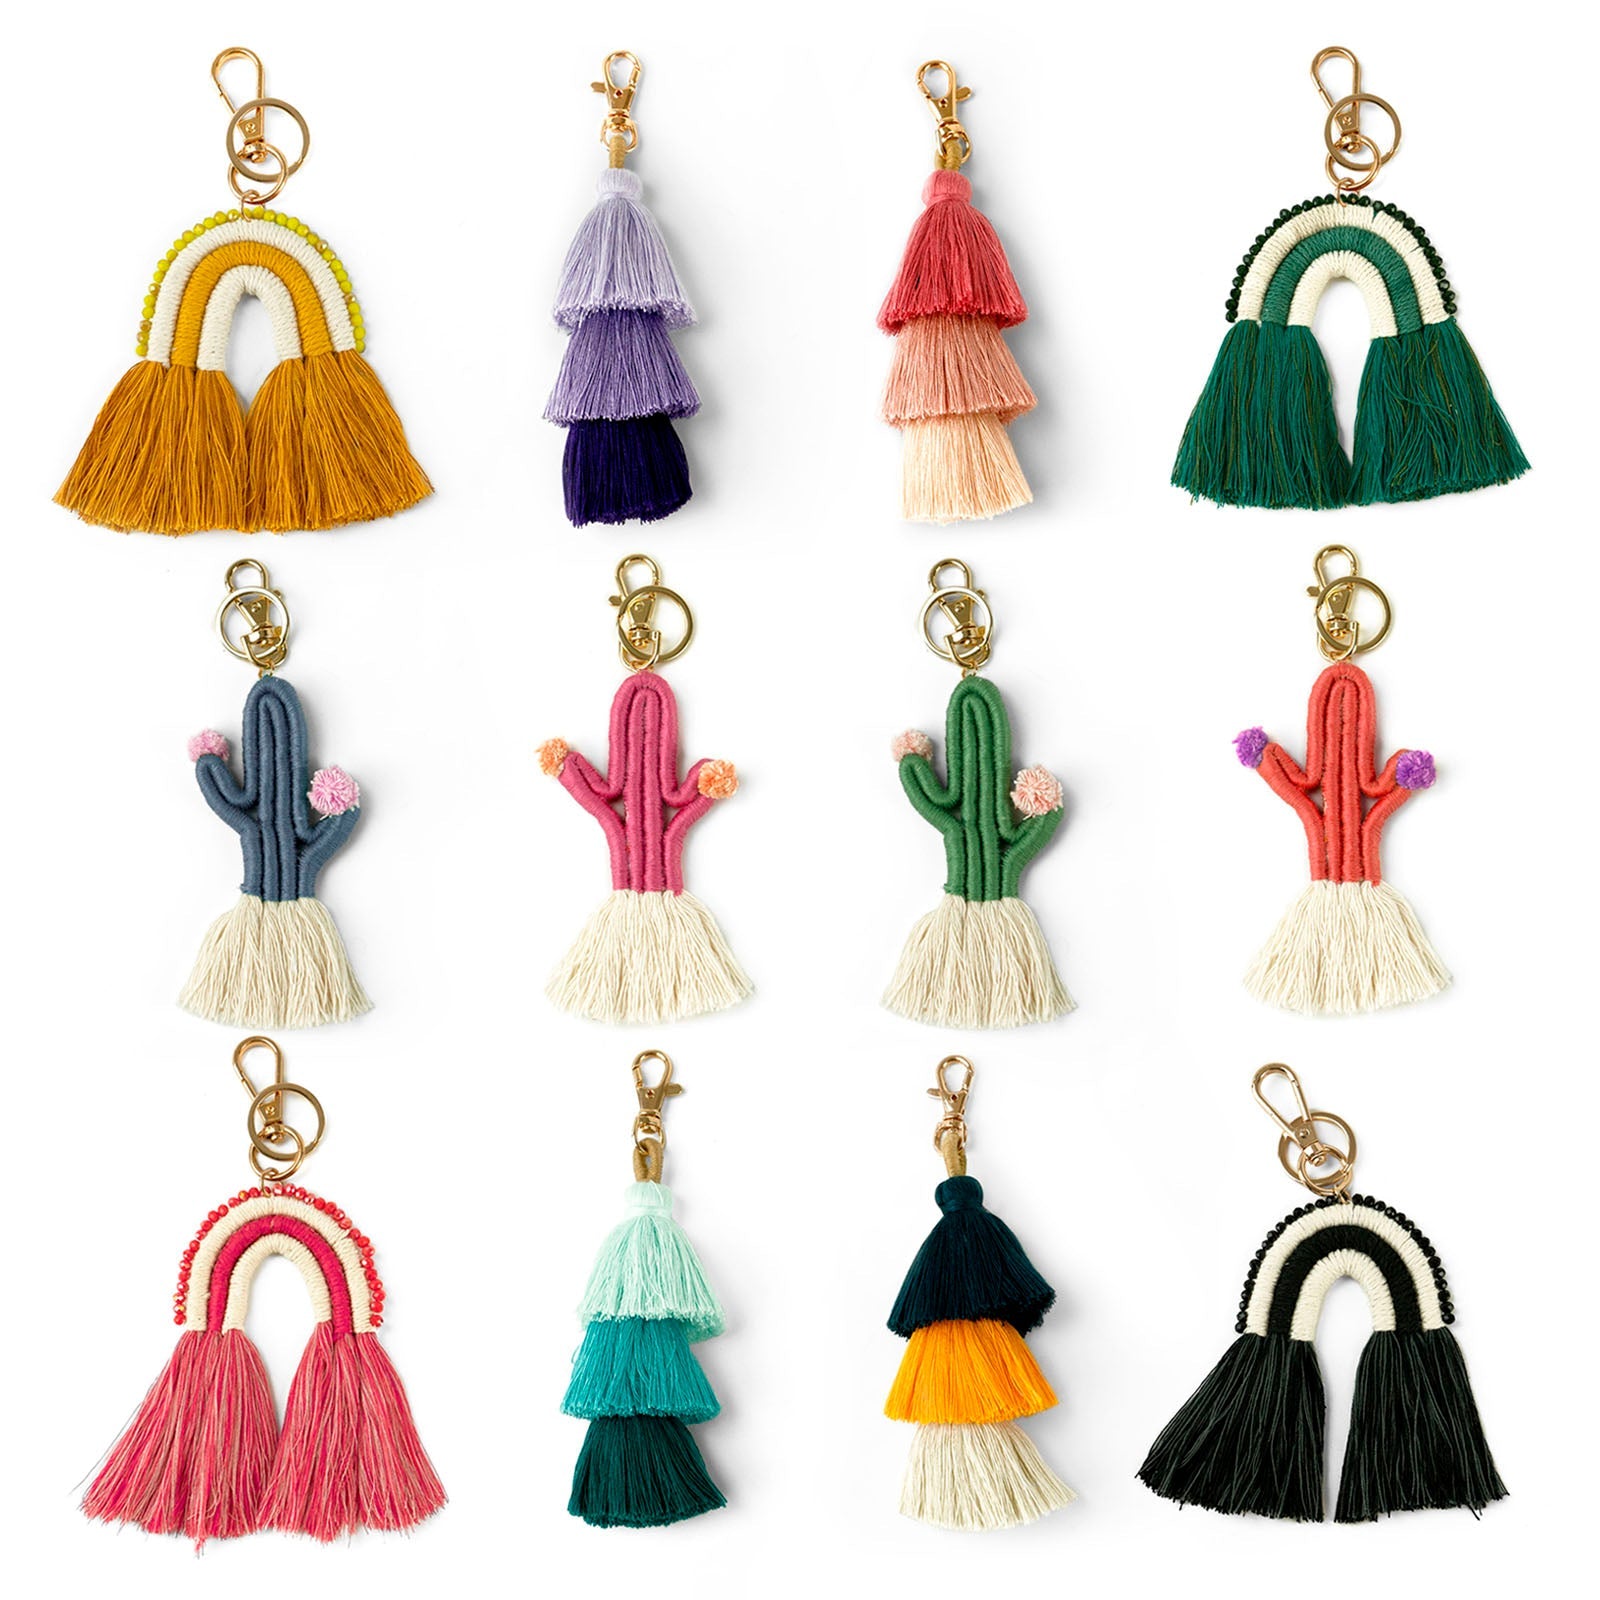 Olivia Moss Yucatán Keychain Cactus Collection Phoenix Nationale